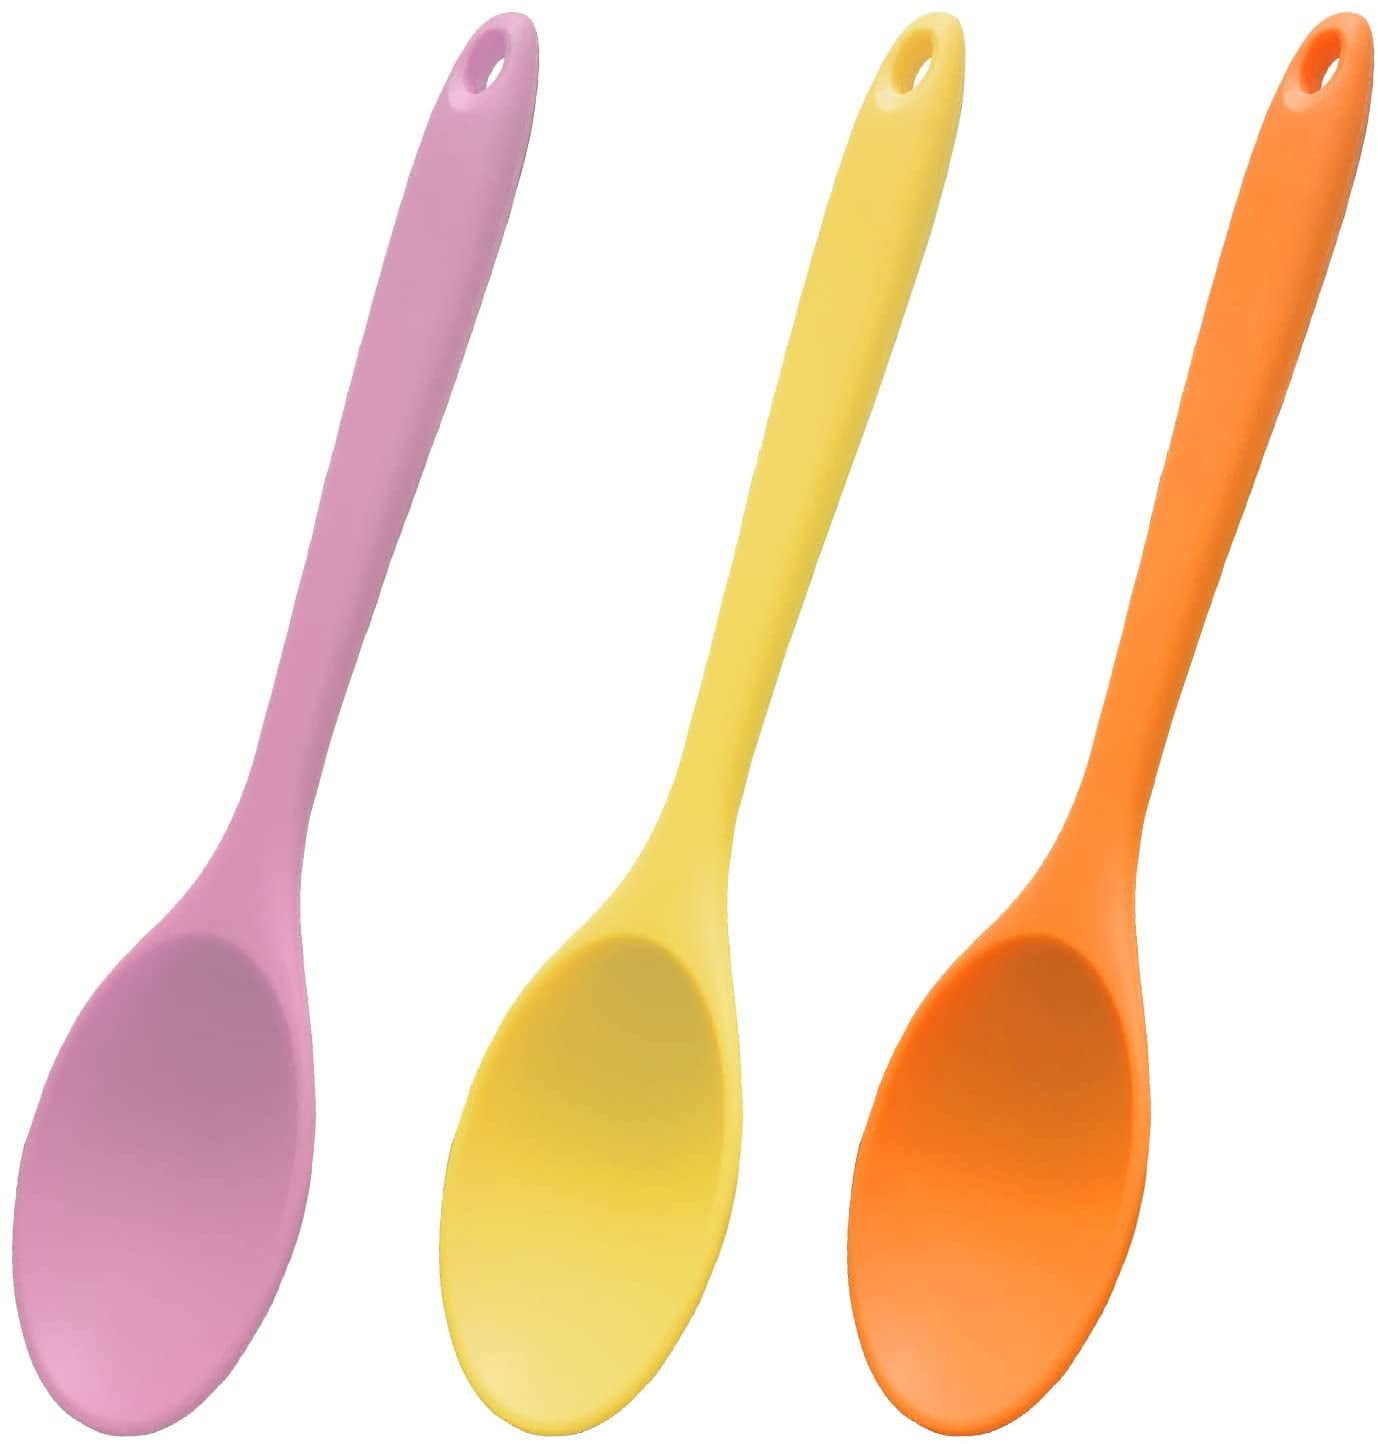 Mixing Spoons Set of 3, Silicone Spoons for Cooking, Serving